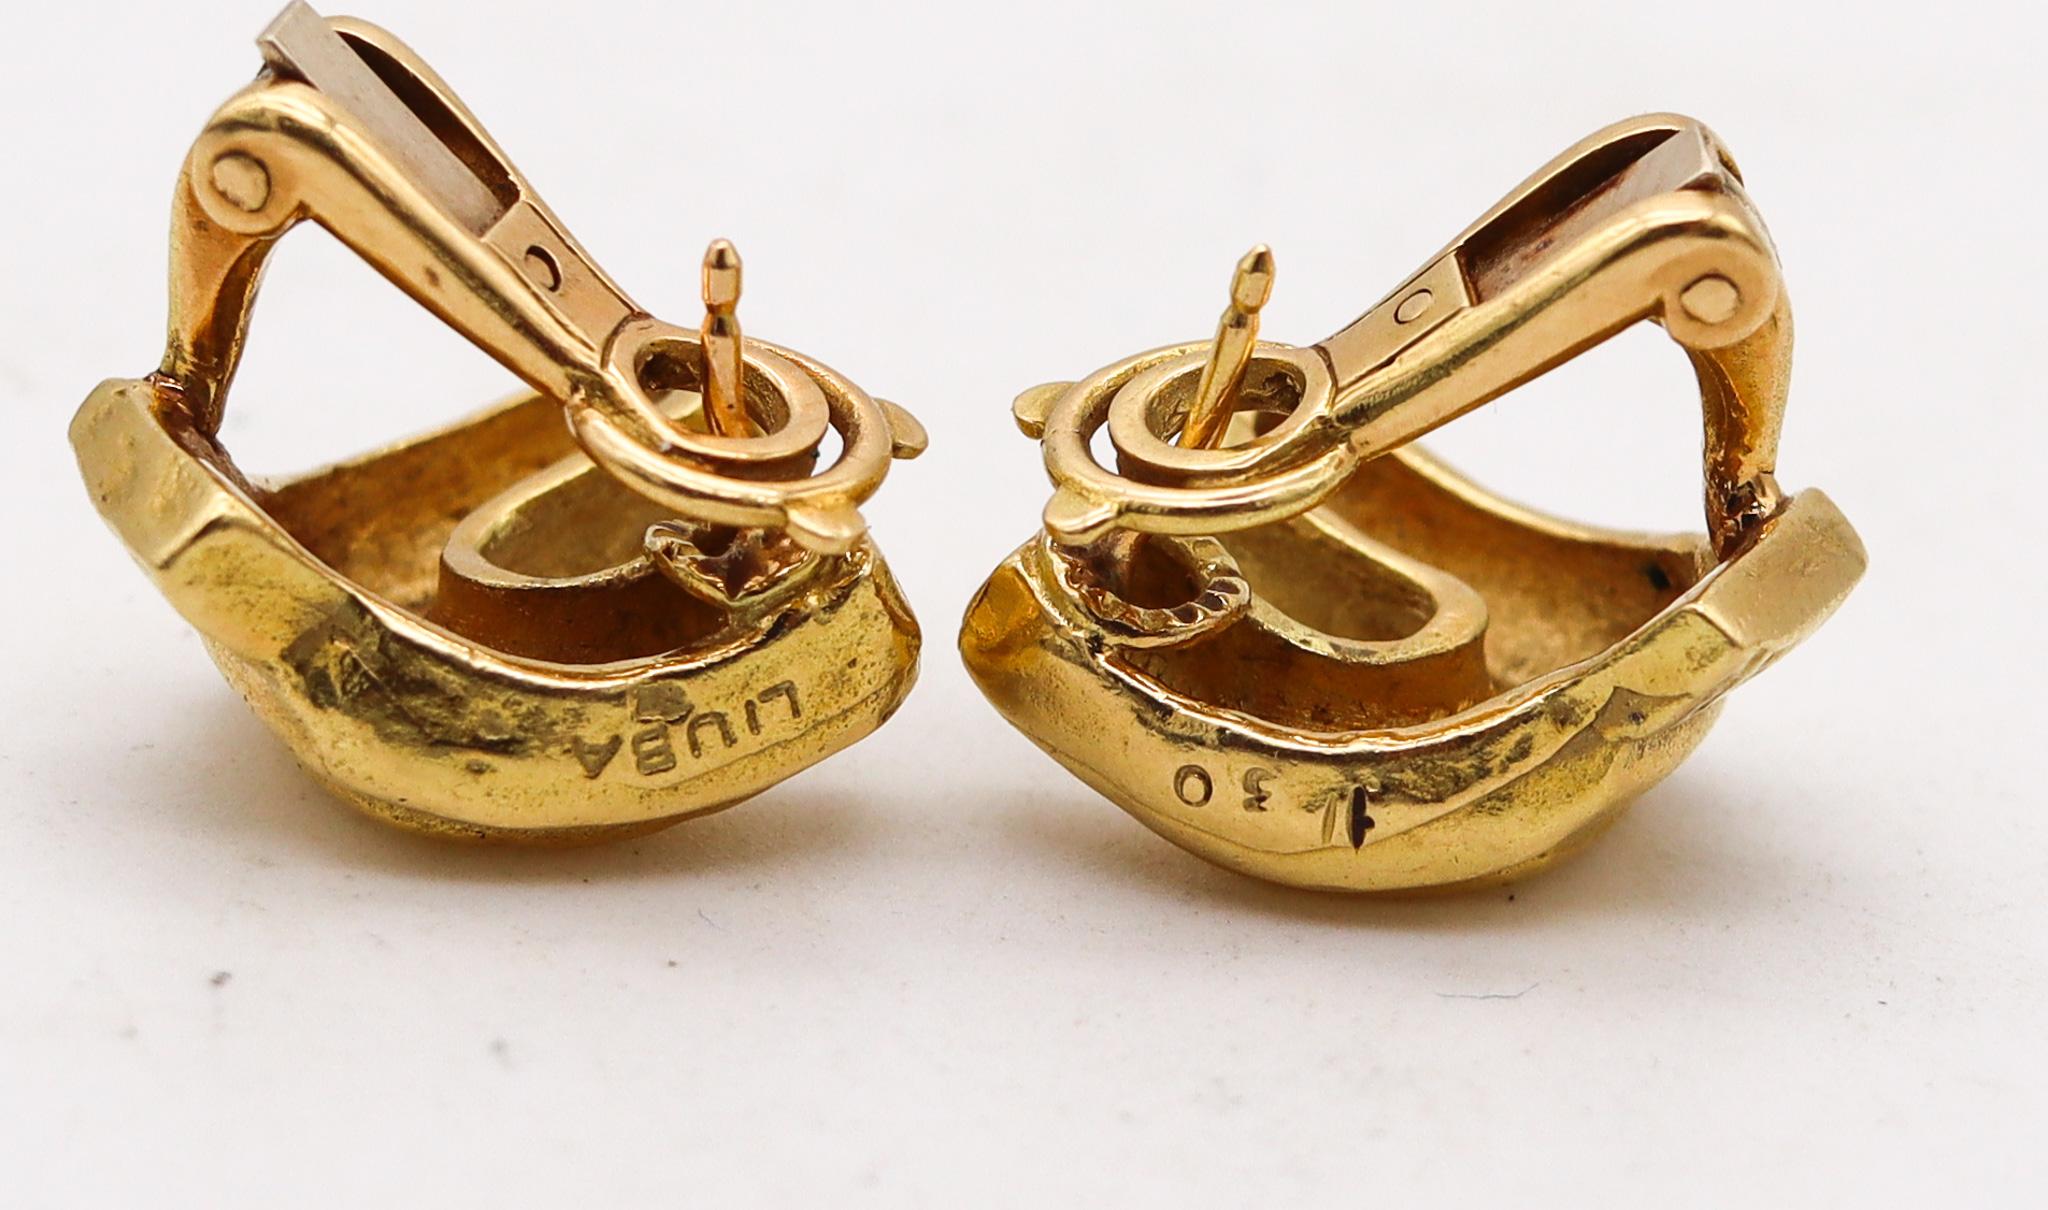 Modernist Liuba Wolf 1970 Sao Paulo Concretism Sculptural Earrings  In 18Kt Yellow Gold For Sale